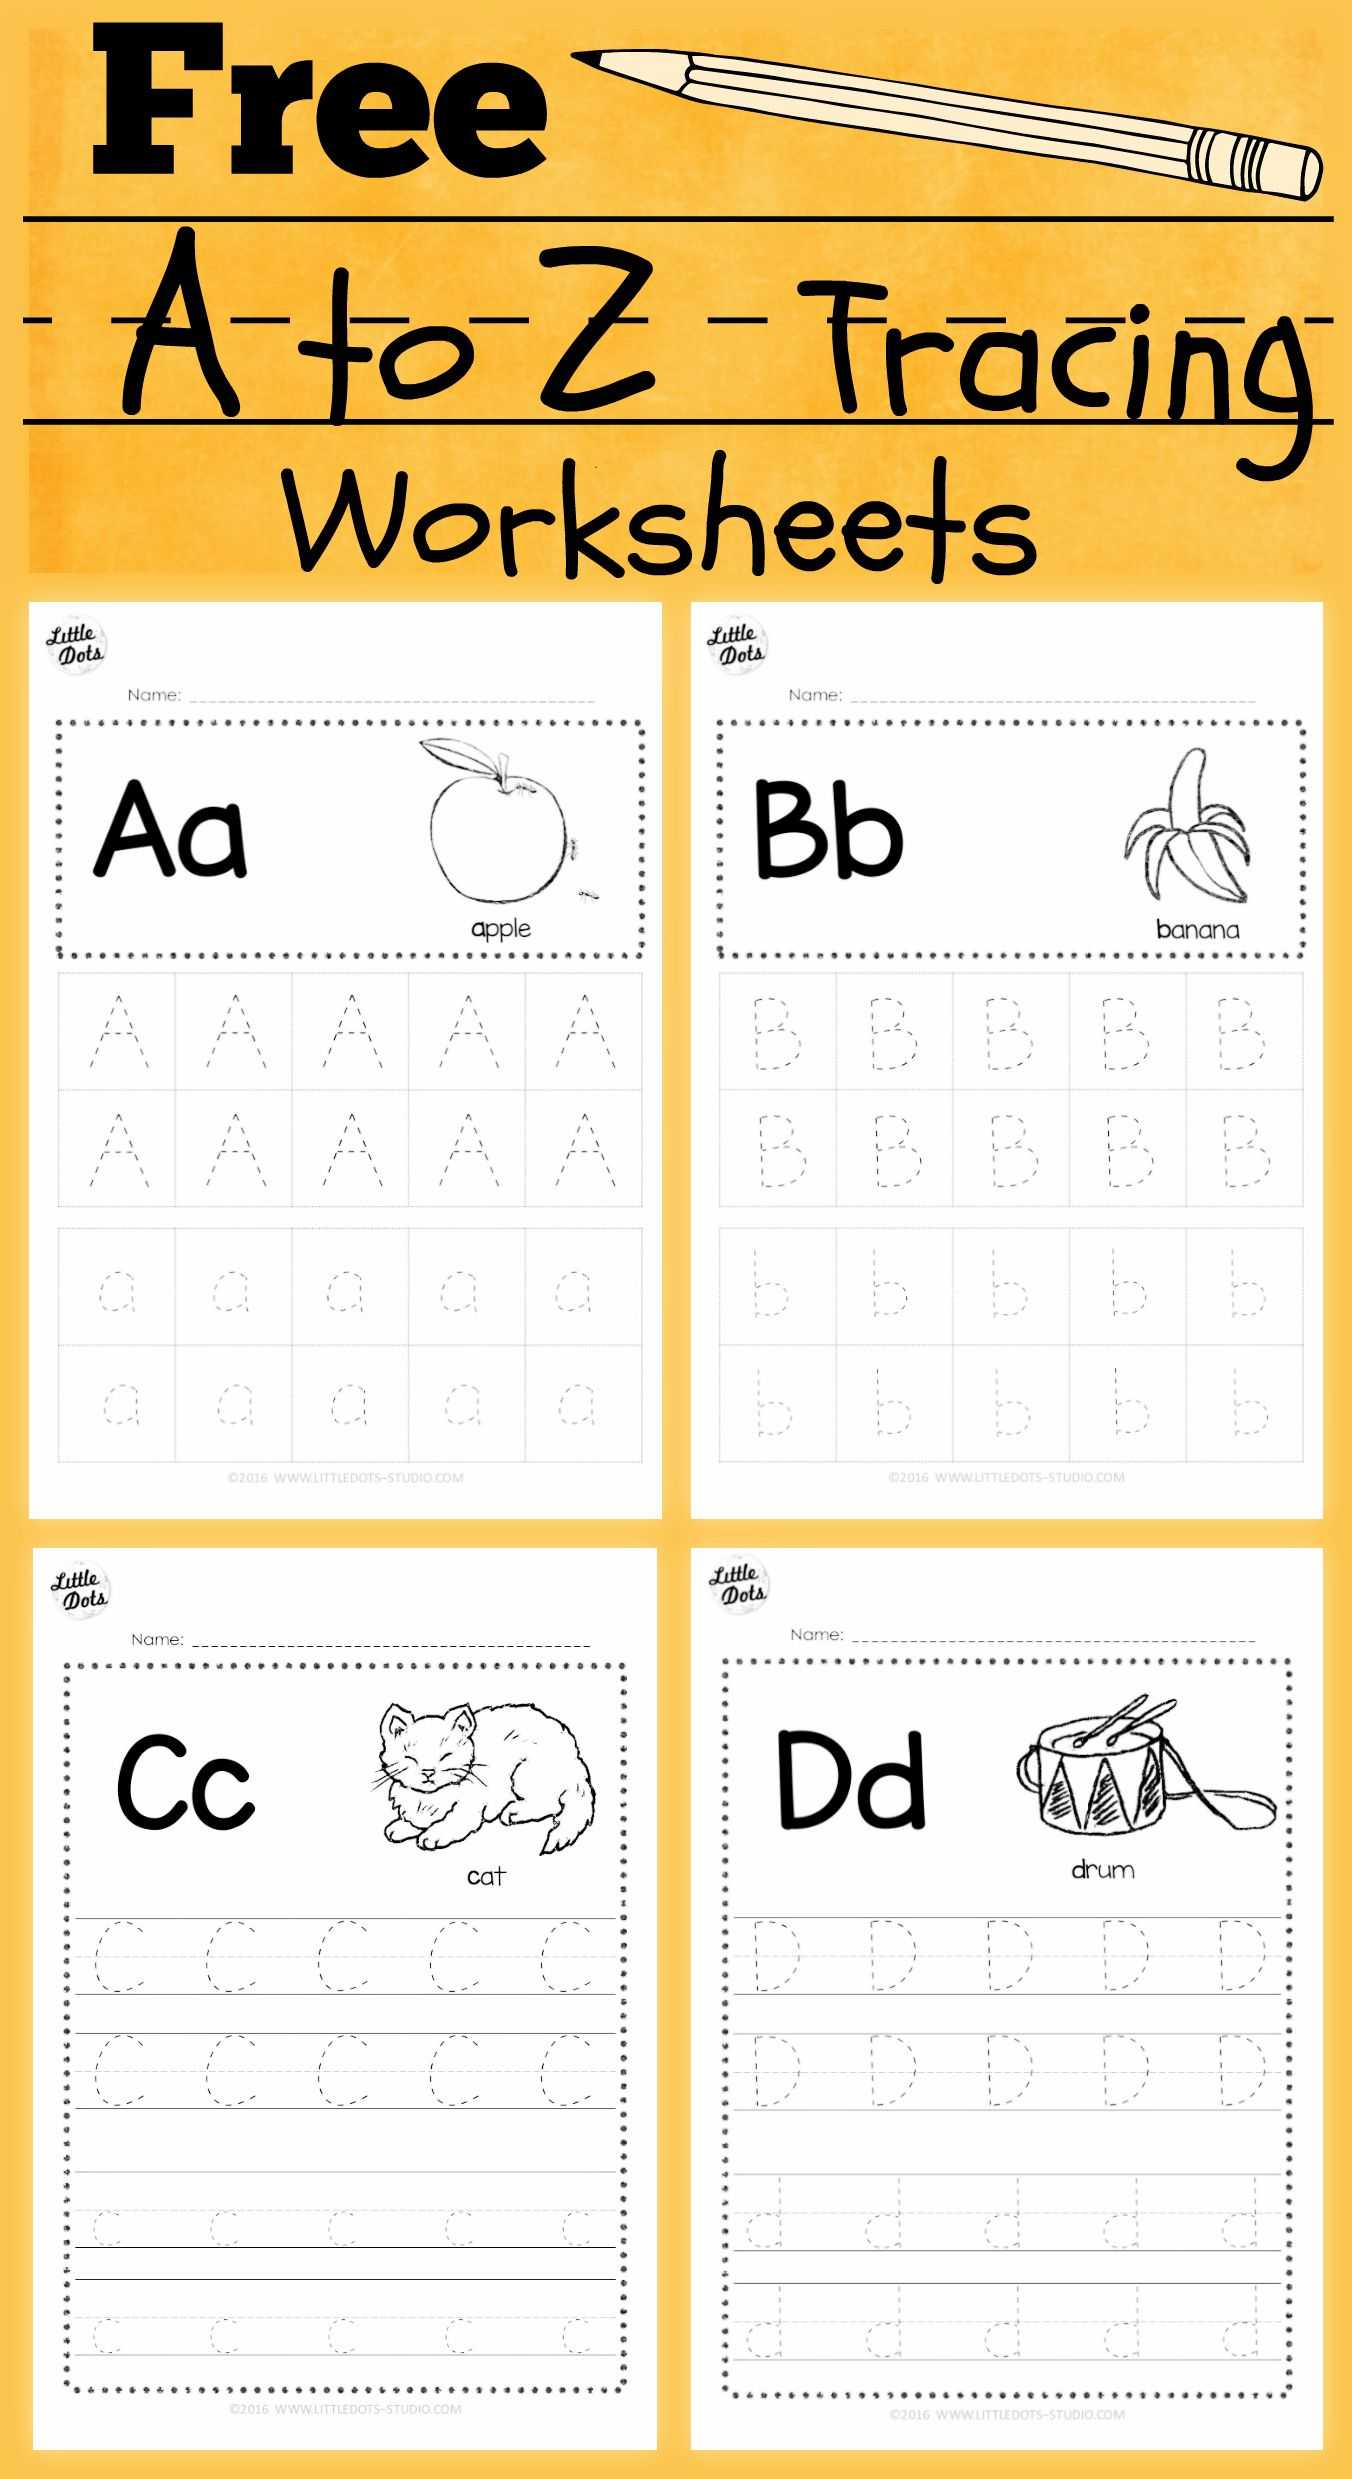 Form W 4 Worksheet as Well as Download Free Alphabet Tracing Worksheets for Letter A to Z Suitable